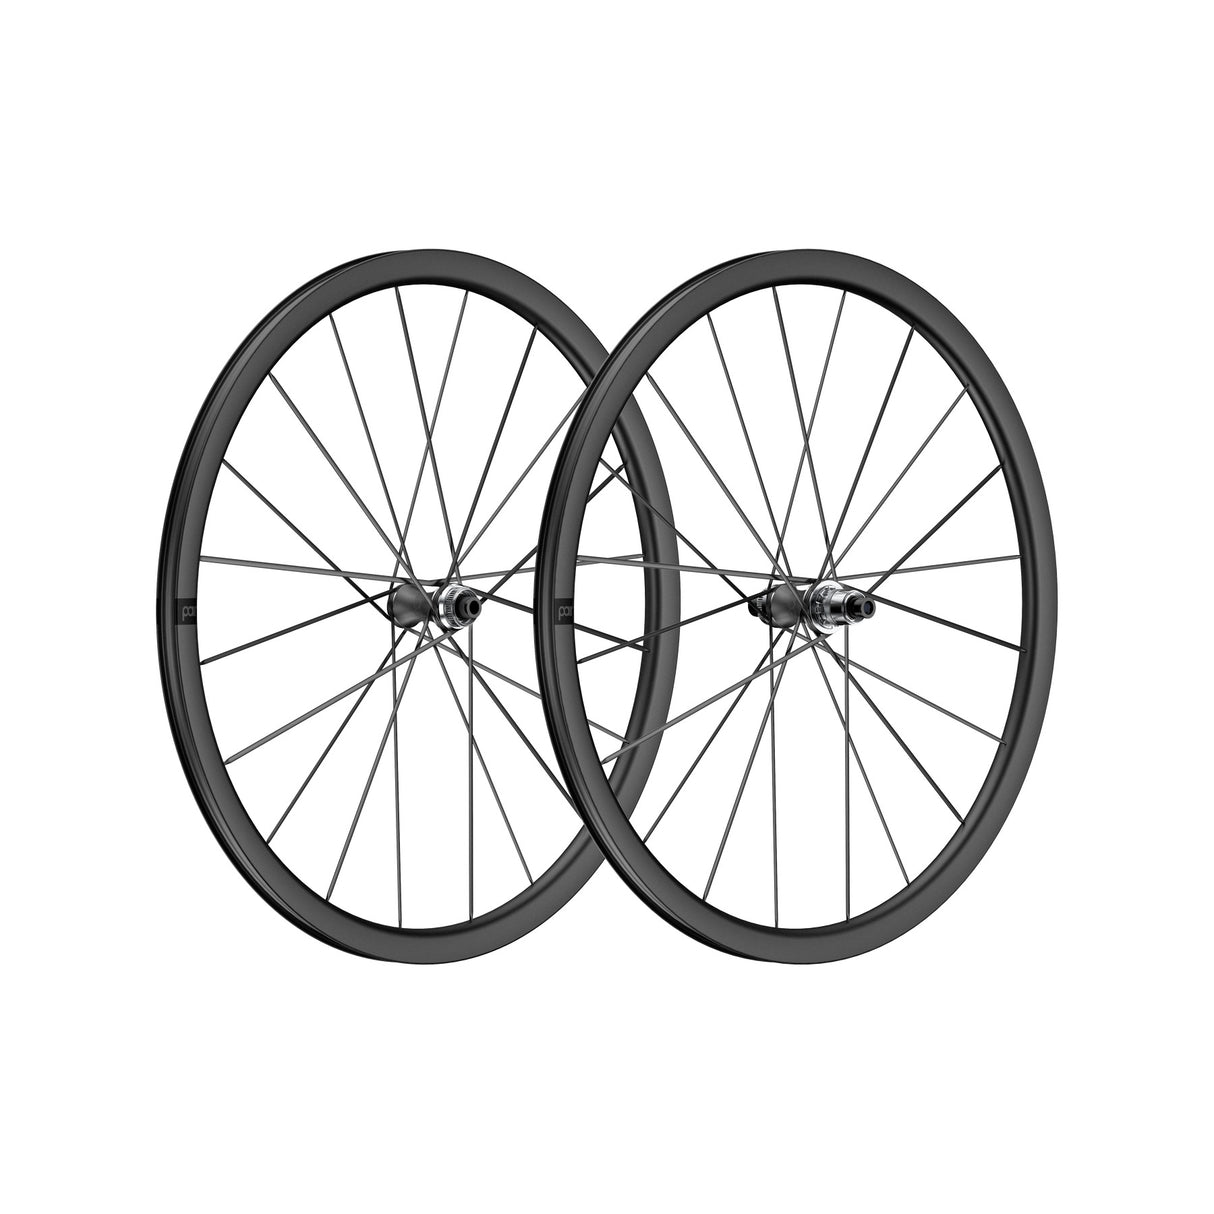 Partington R-Series MKII 31/31 Wheelset | Strictly Bicycles